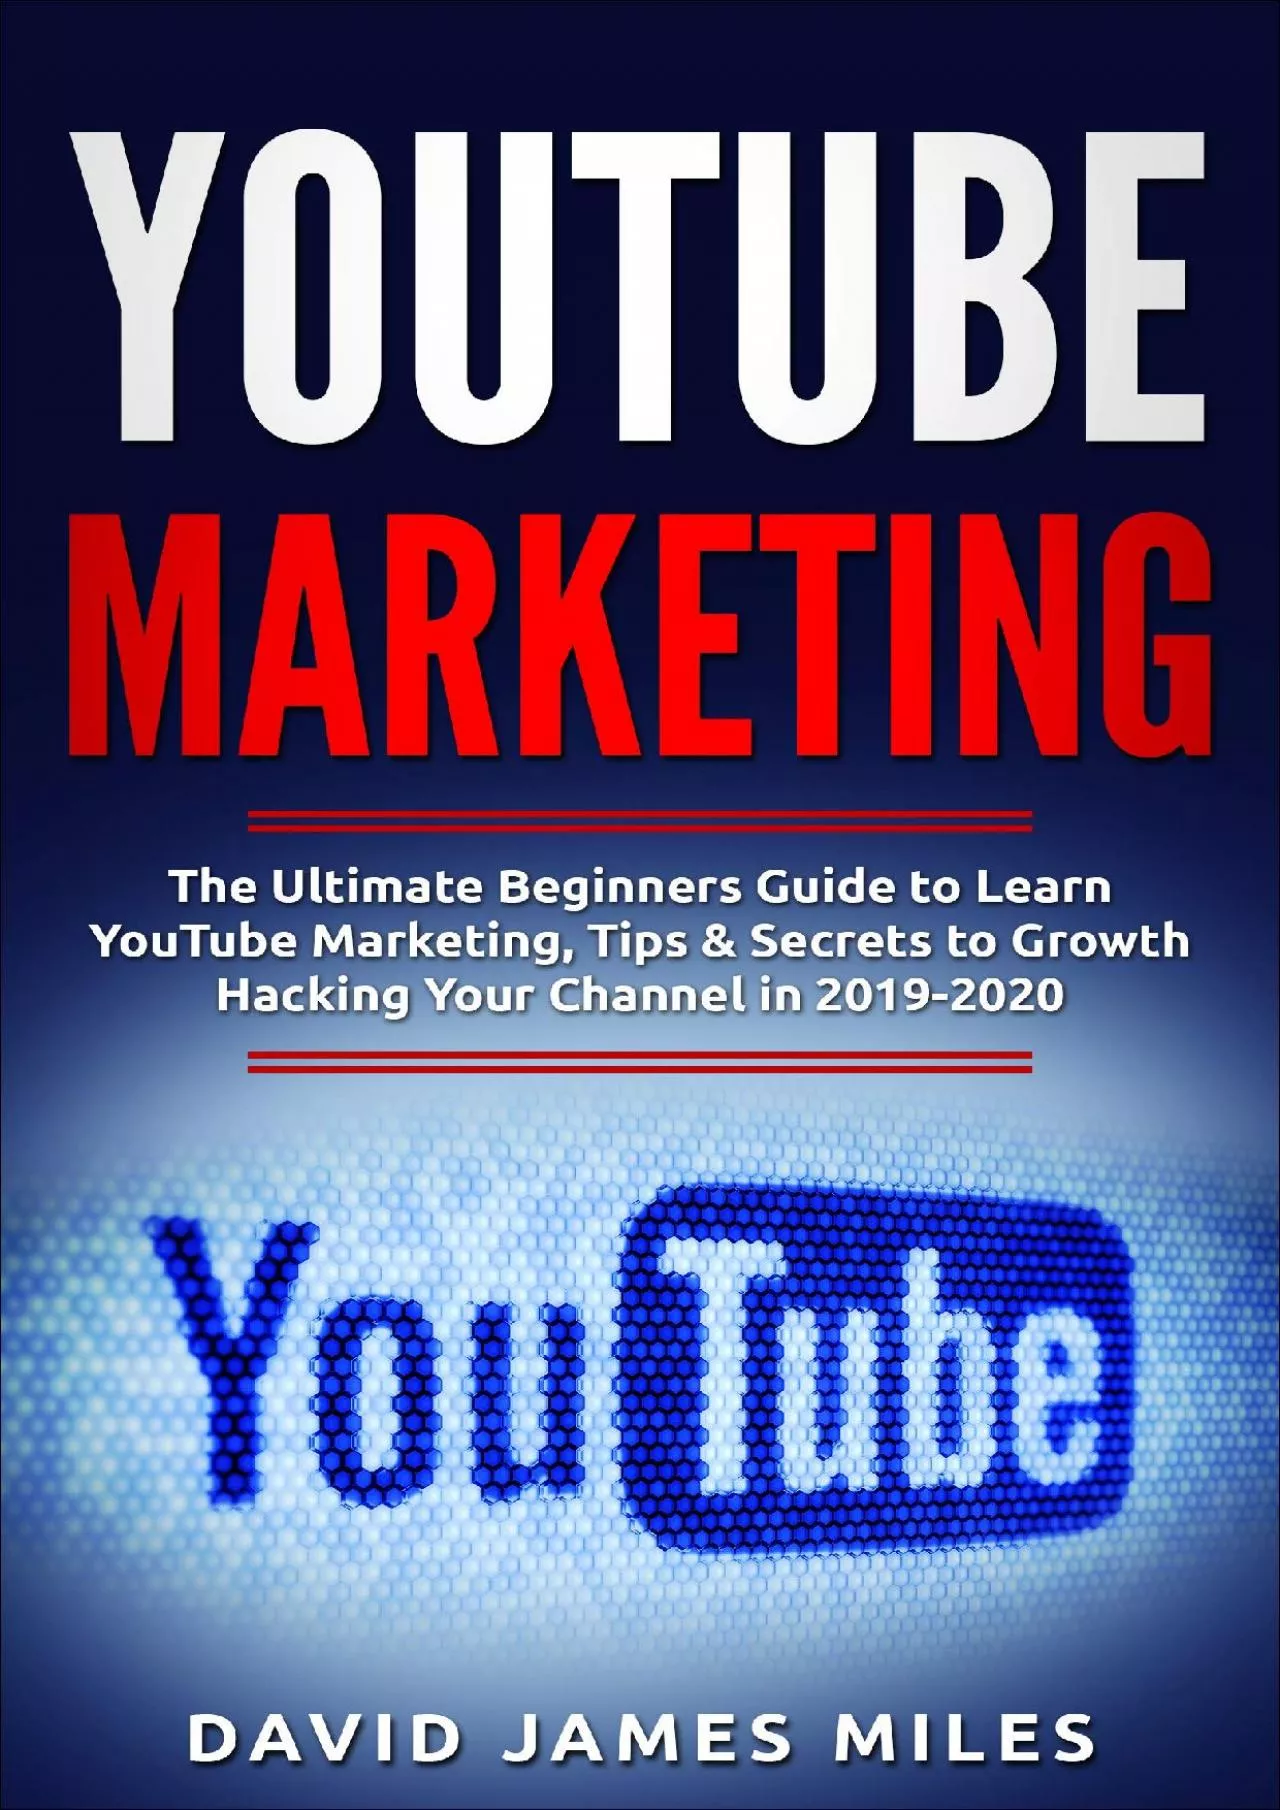 Youtube Marketing: The Ultimate Beginners Guide to Learn YouTube Marketing, Tips & Secrets